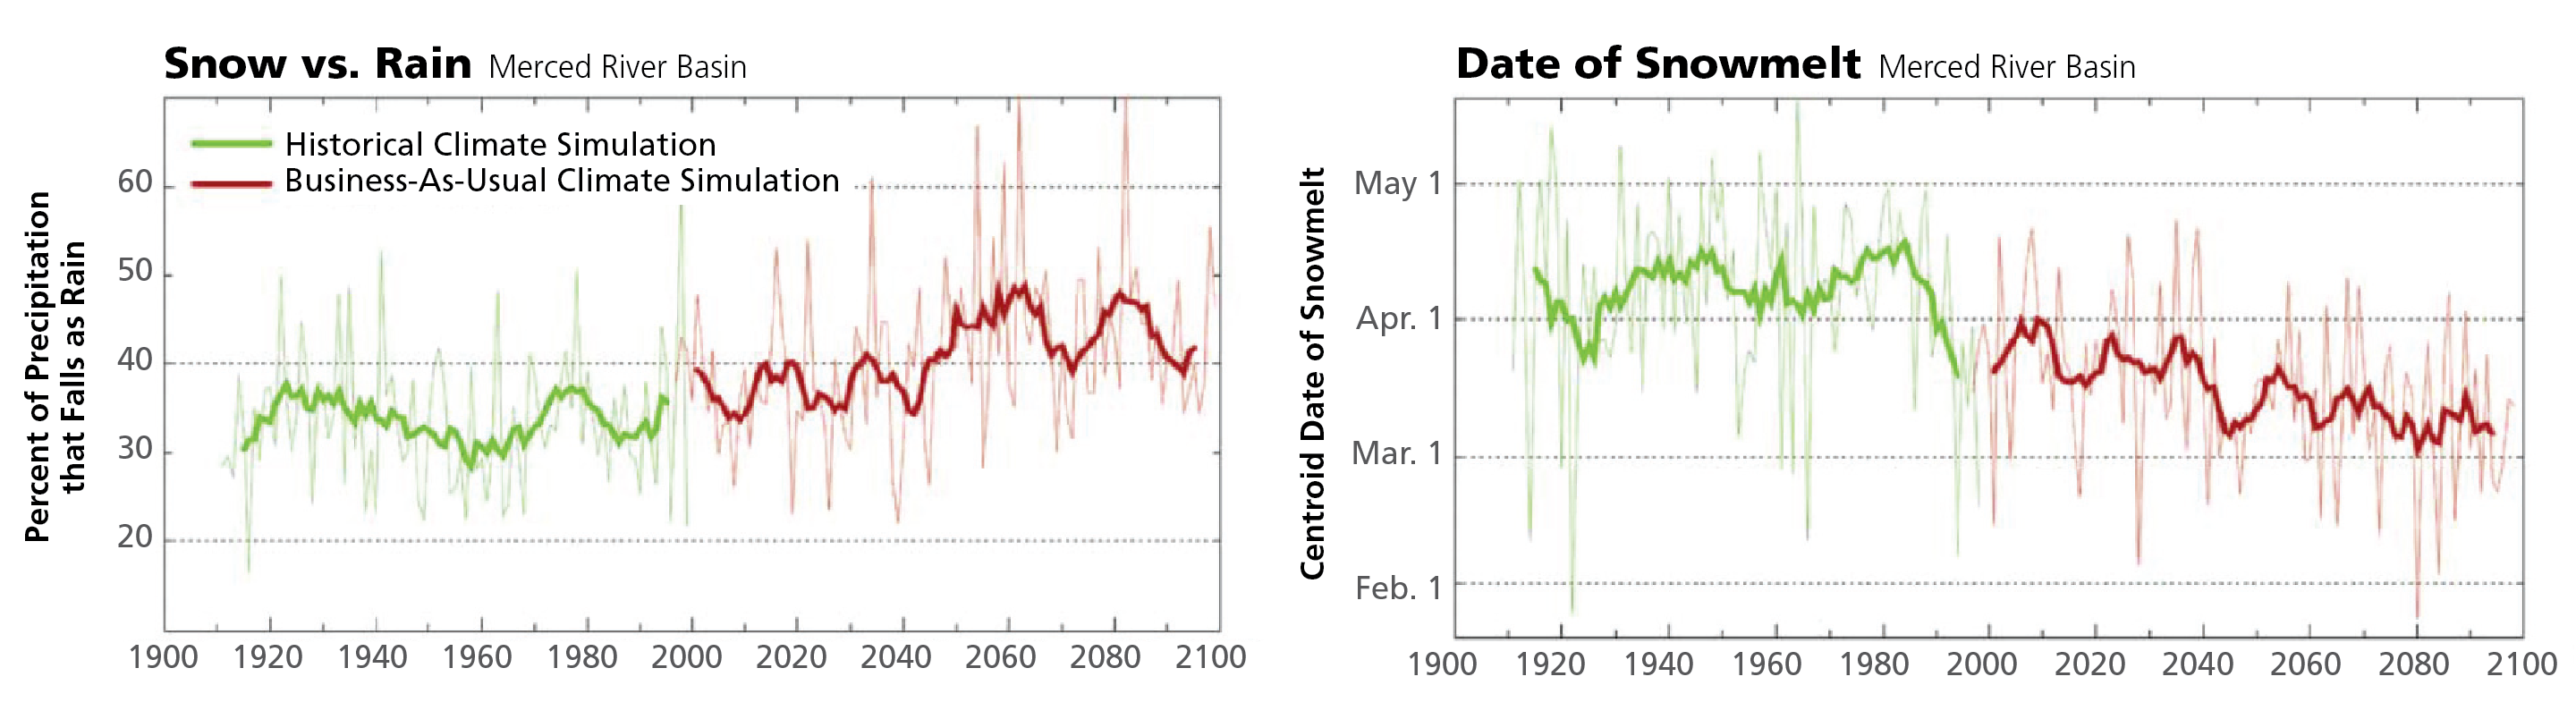 Two graphs describe historical and future climate simulations for the Merced River Basin.